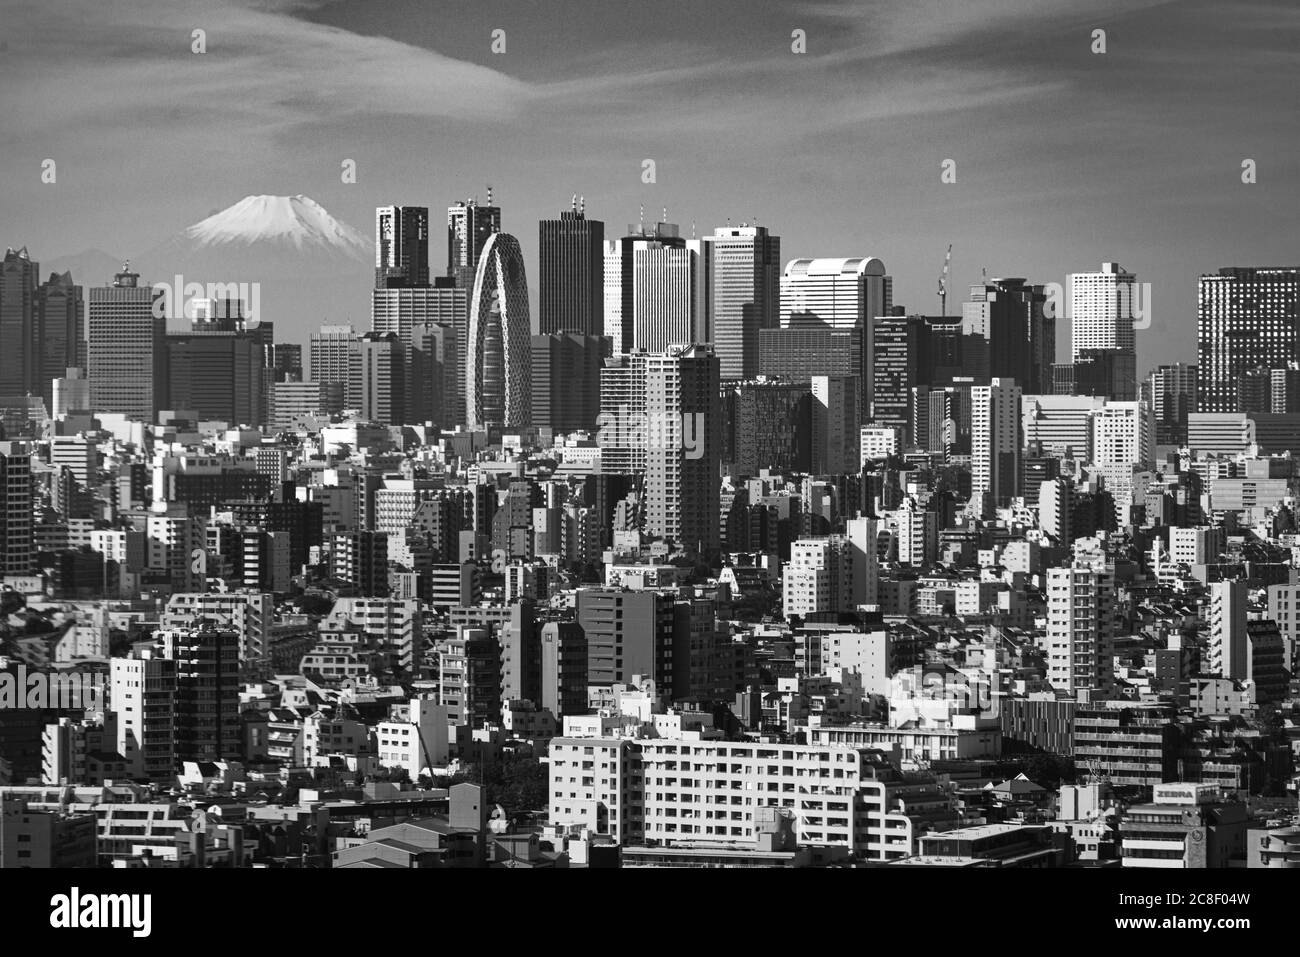 Black and White photo of the skyle of Tokyo with mount Fuji in the distance. Skyscrapers viewn form the Stock Photo